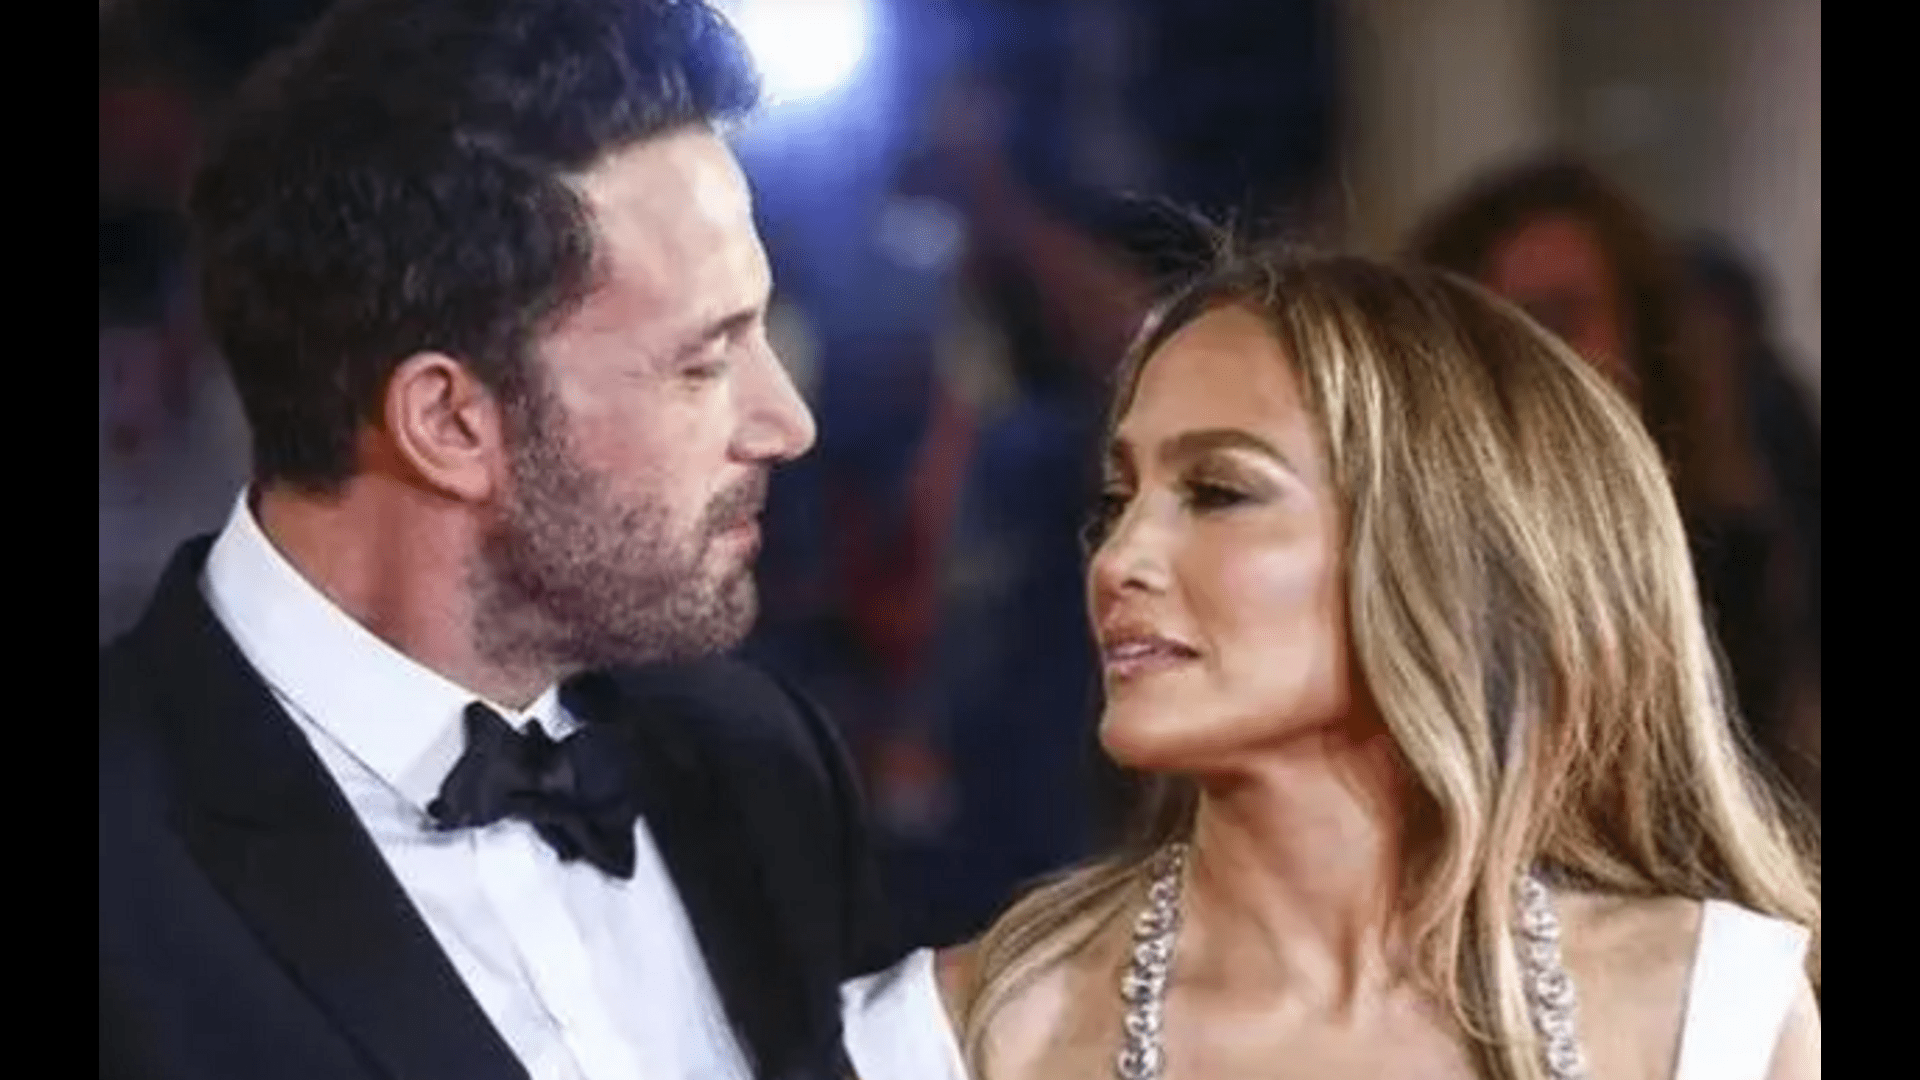 ”jennifer-lopez-reveals-how-ben-affleck-proposed-to-her-for-the-second-time-after-20-years-its-happening-again”